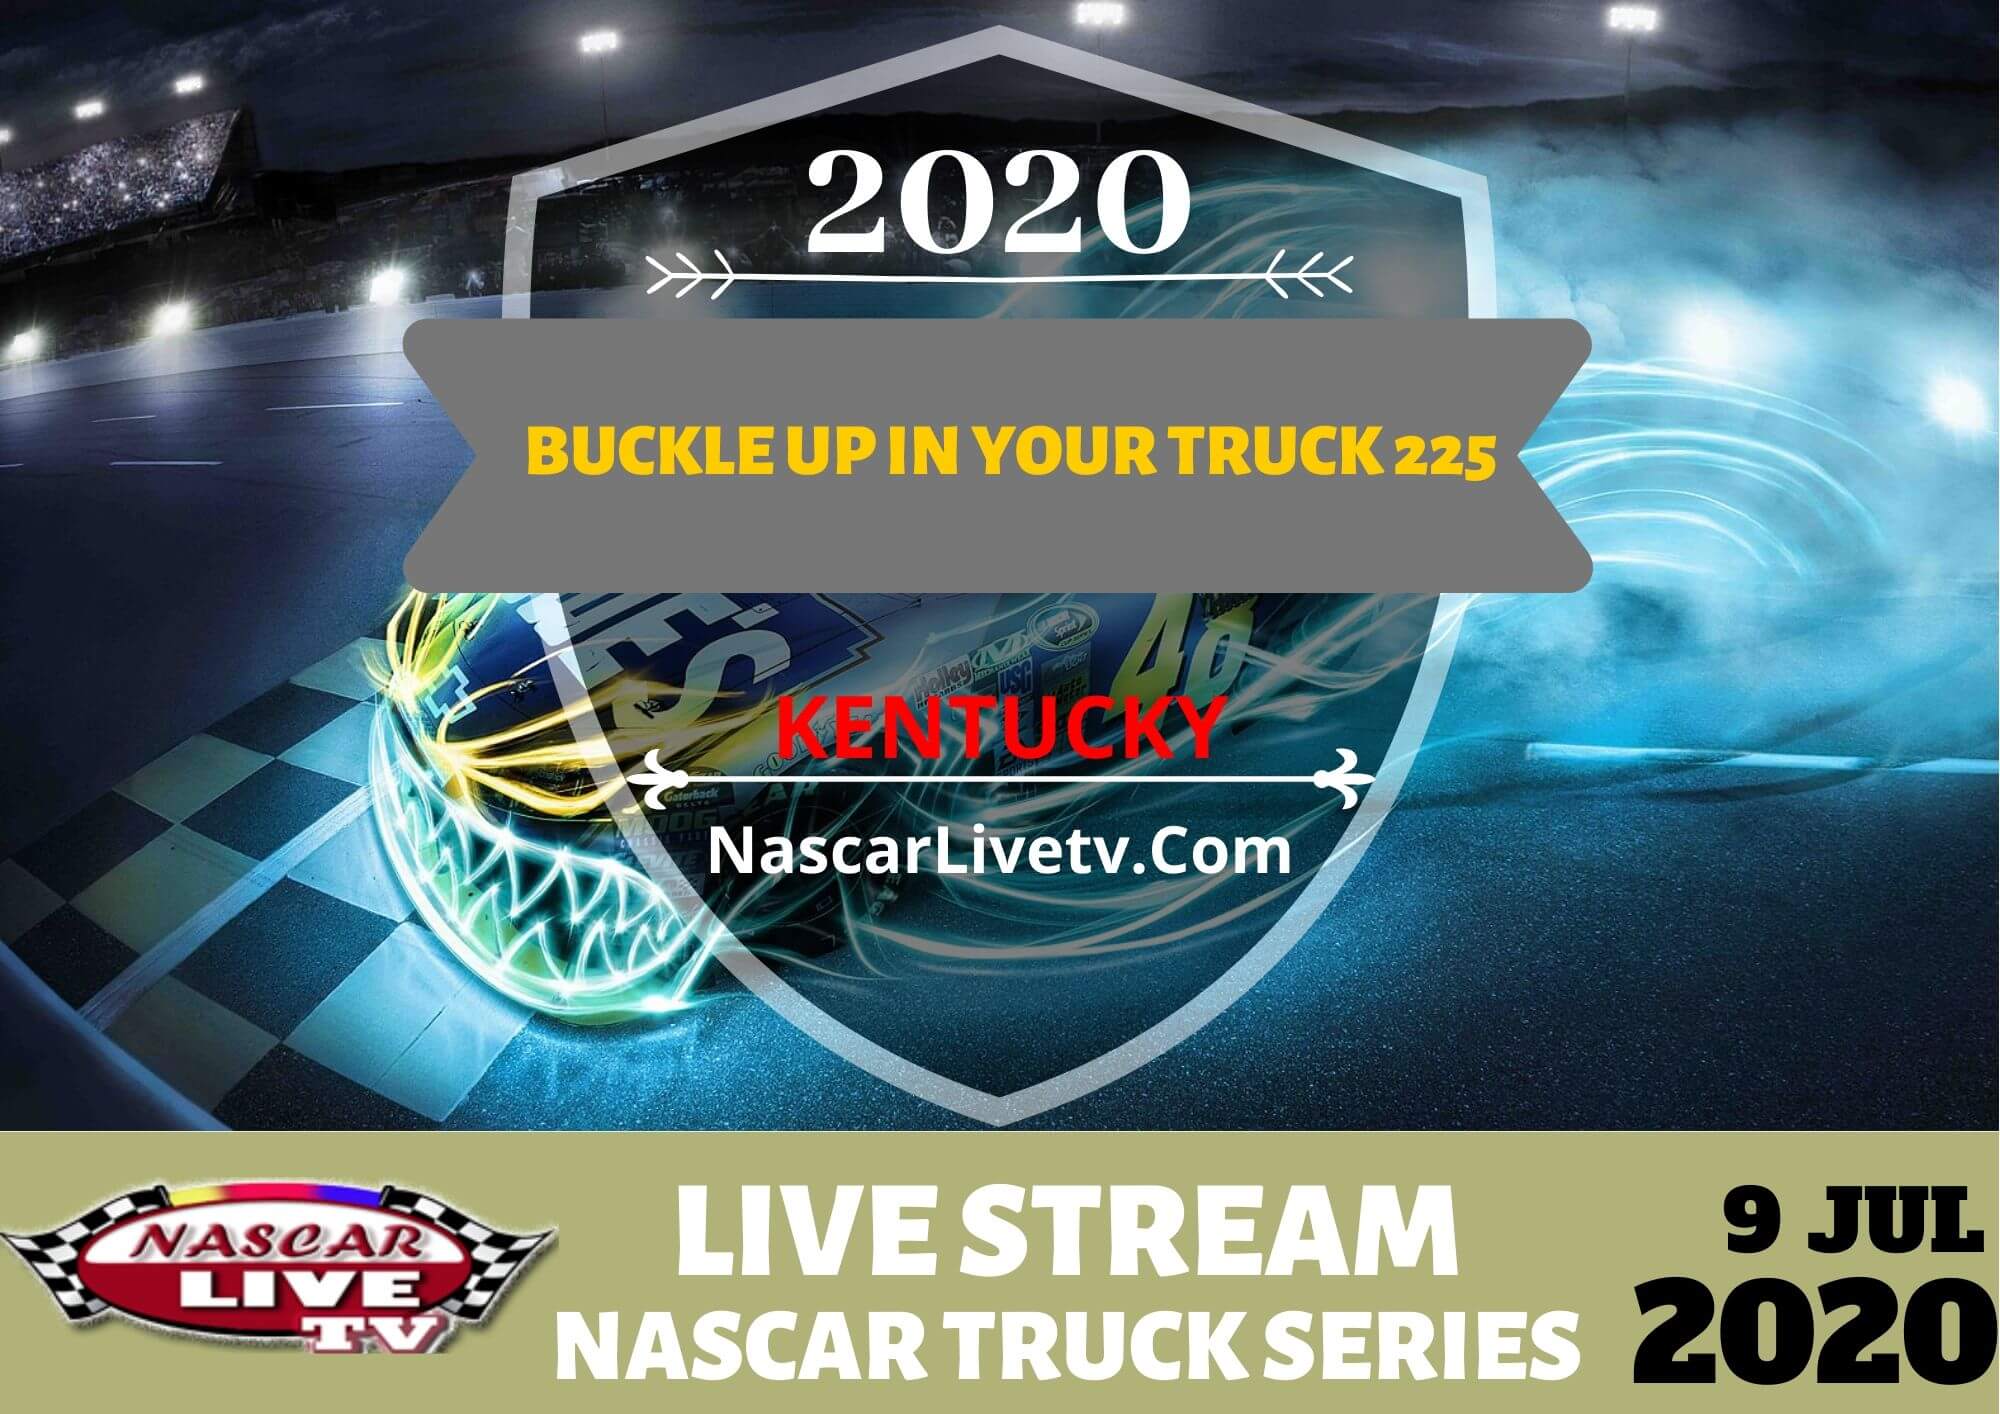 Nascar Truck Series Buckle Up In Your Truck 225 Live Stream 2020